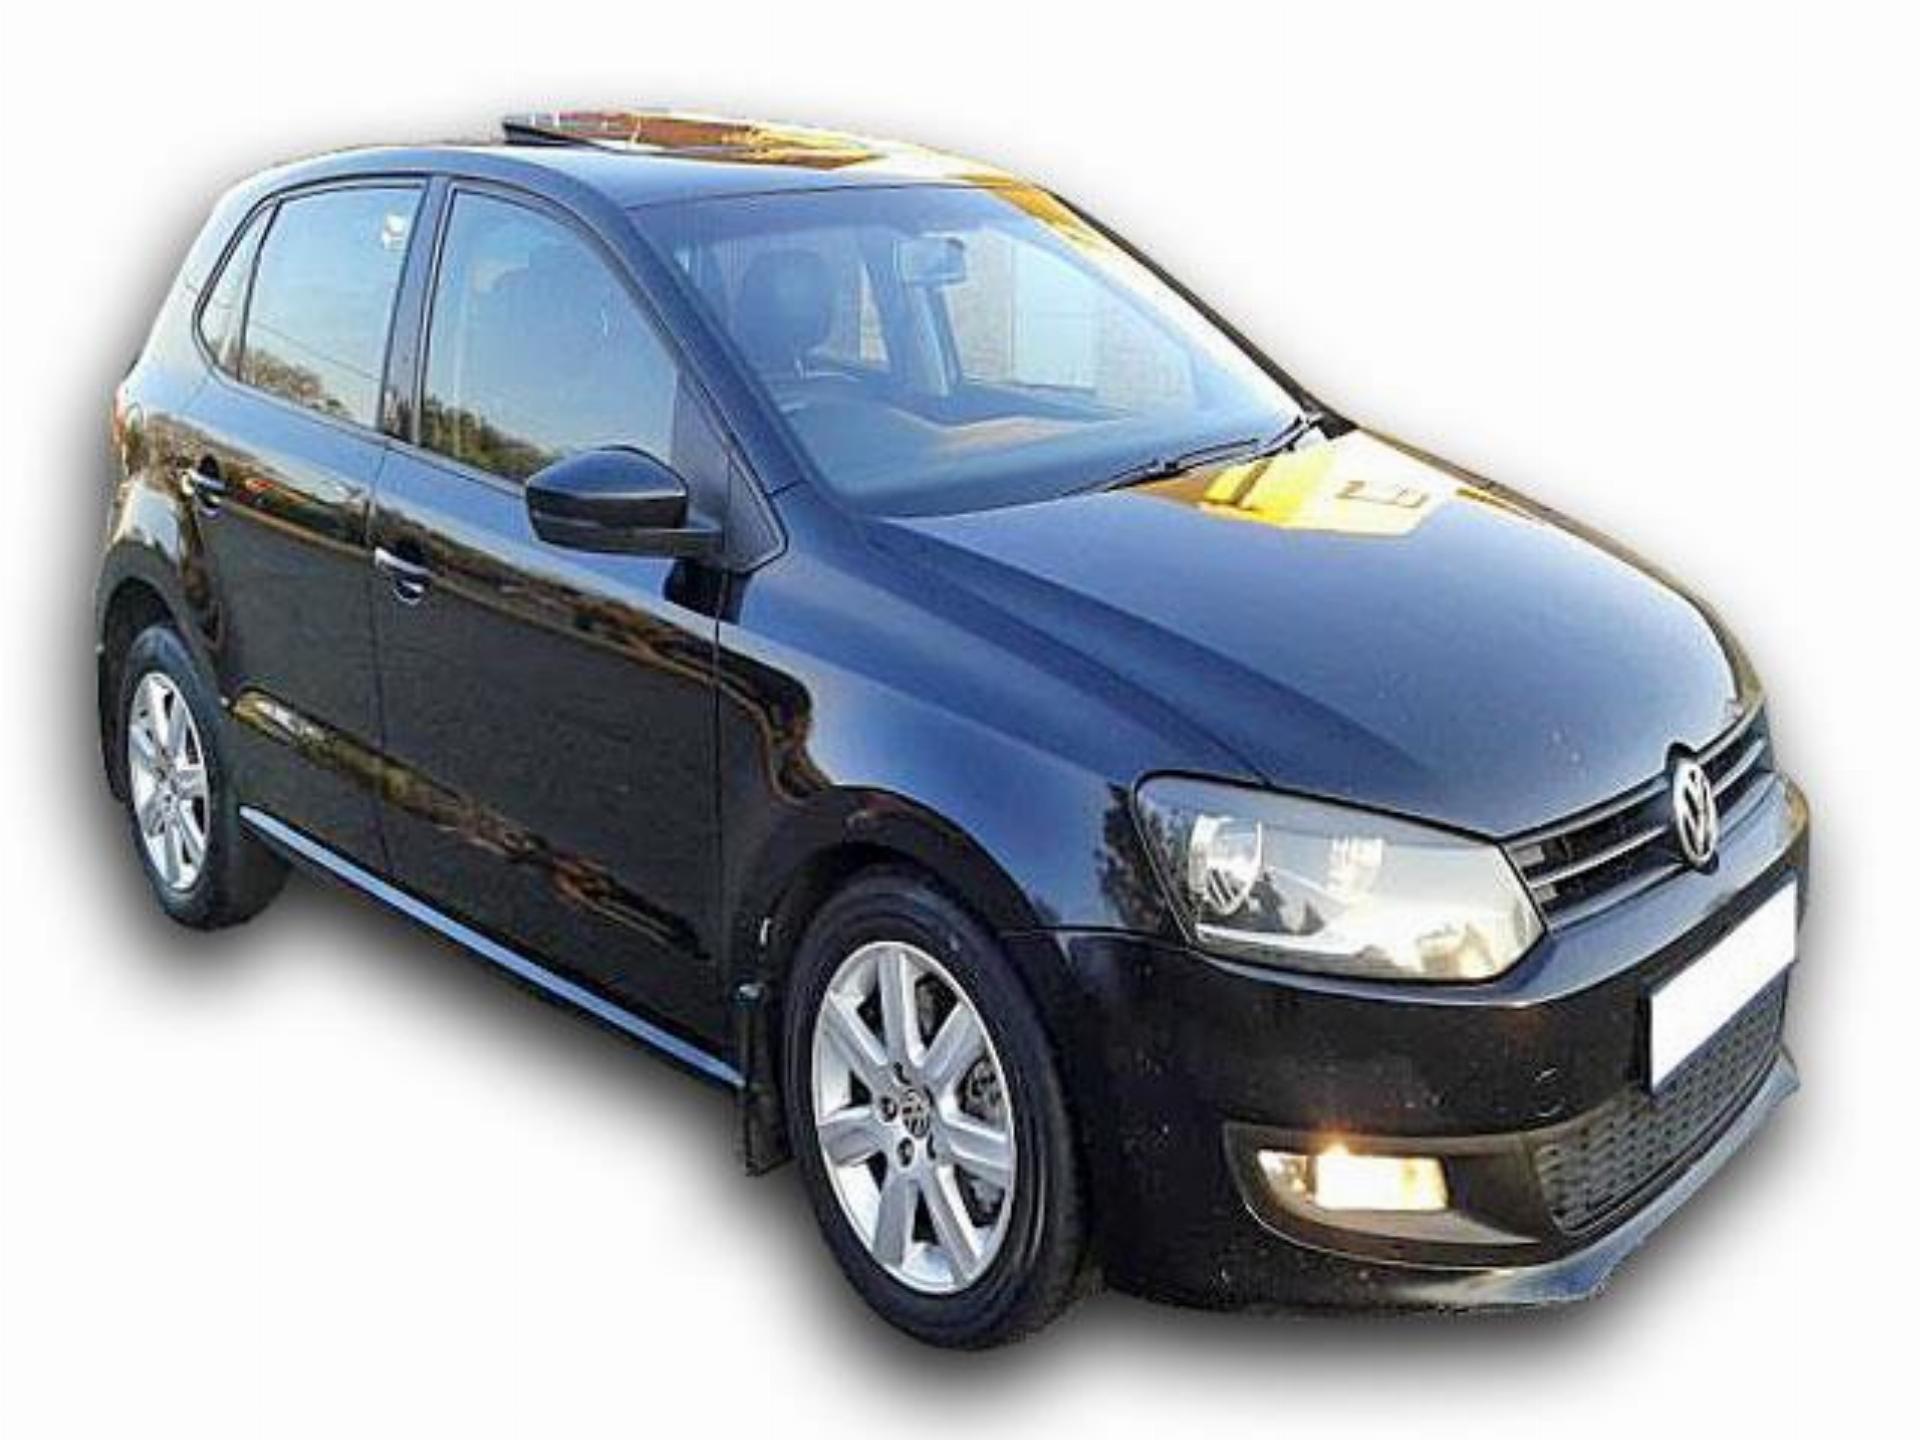 Used VW Polo 1.6 TDi Comfortline 2010 on auction PV1026470